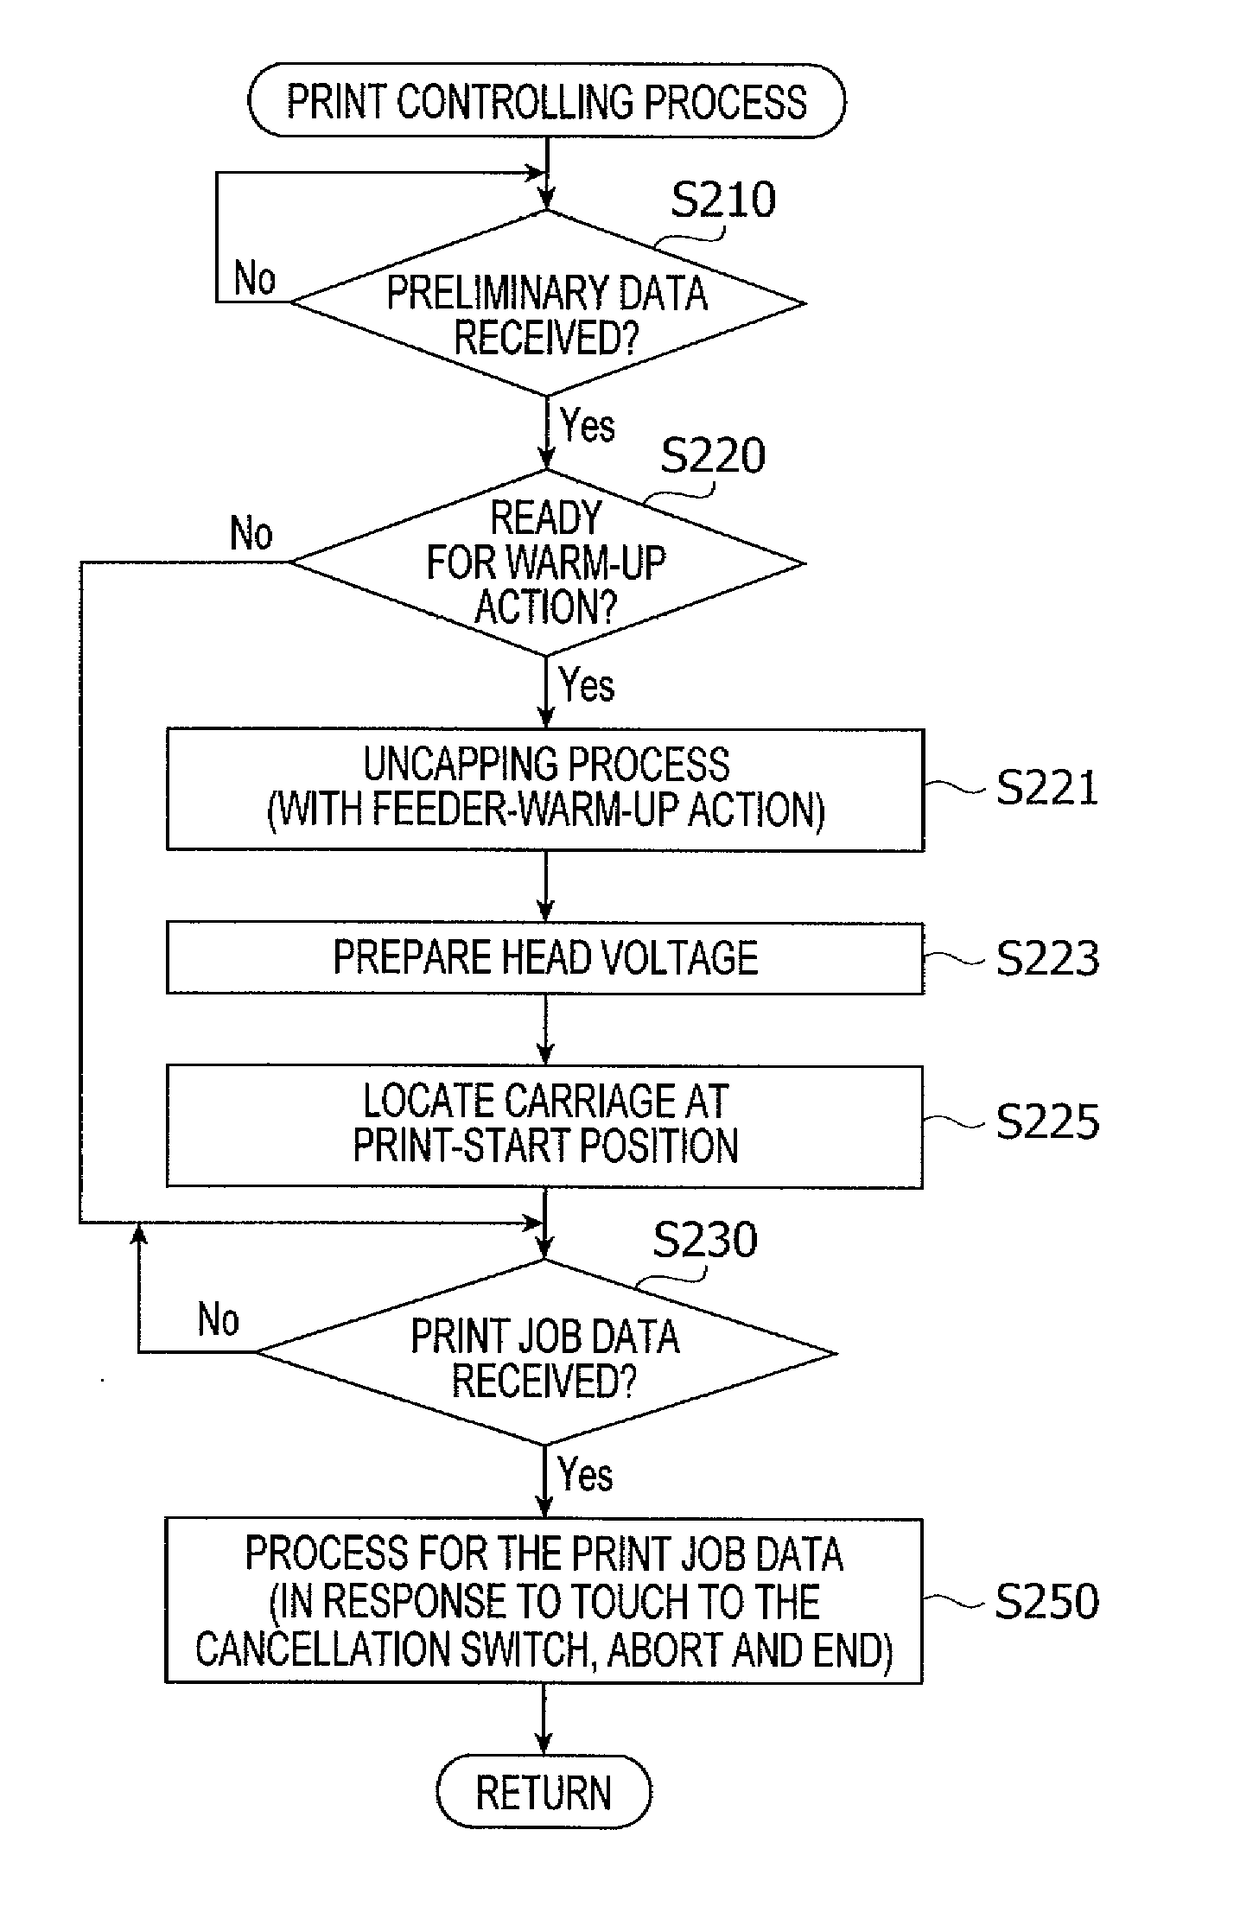 Image printing apparatus and method for controlling an image printing apparatus